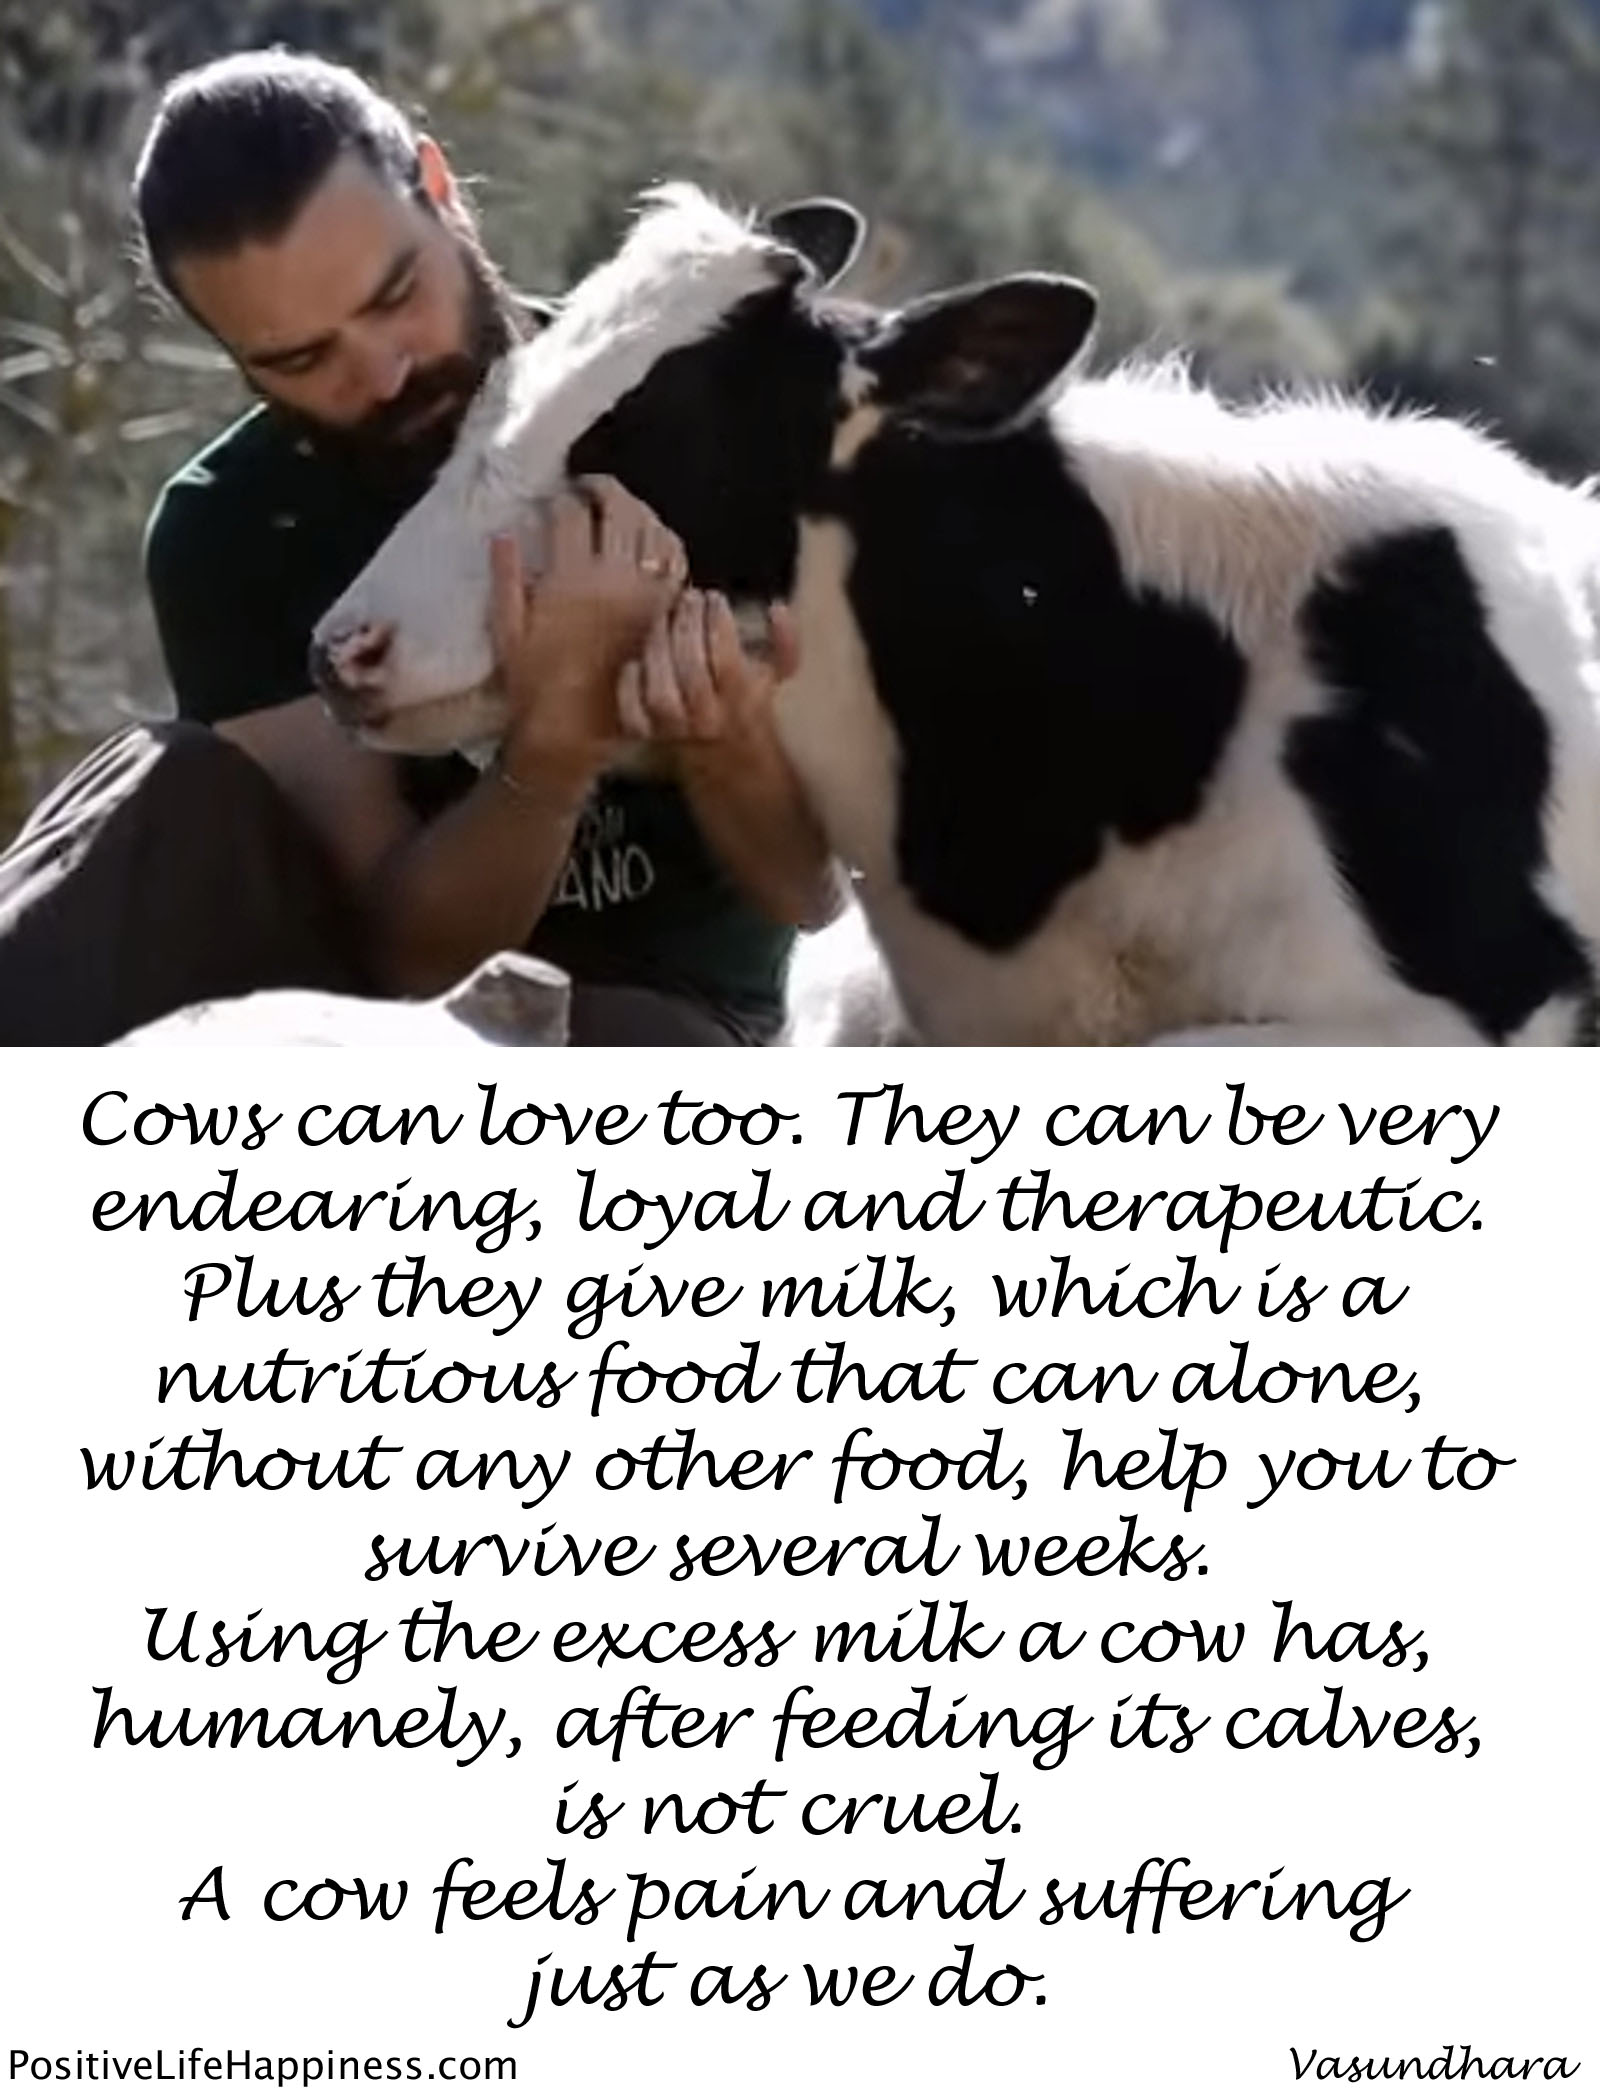 Cows can love too